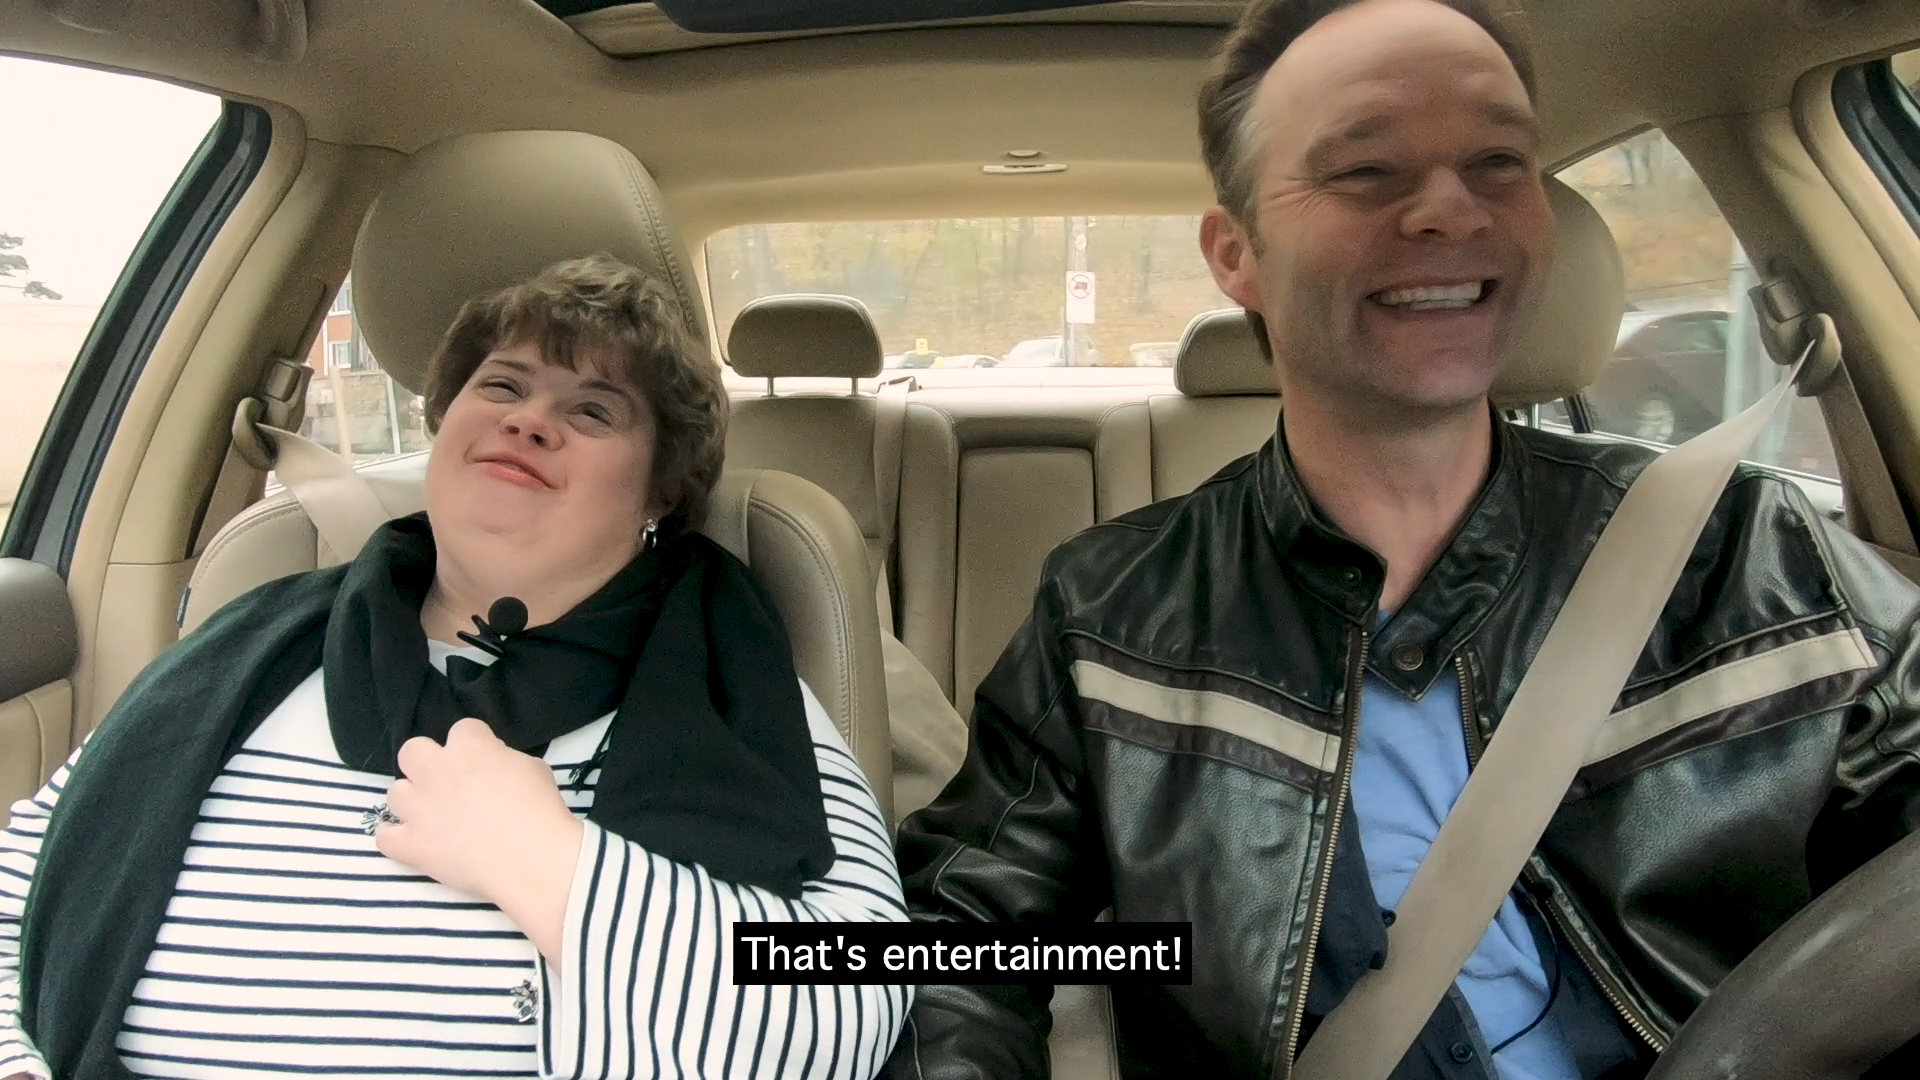 Woman and man in car singing the song That's Entertainment